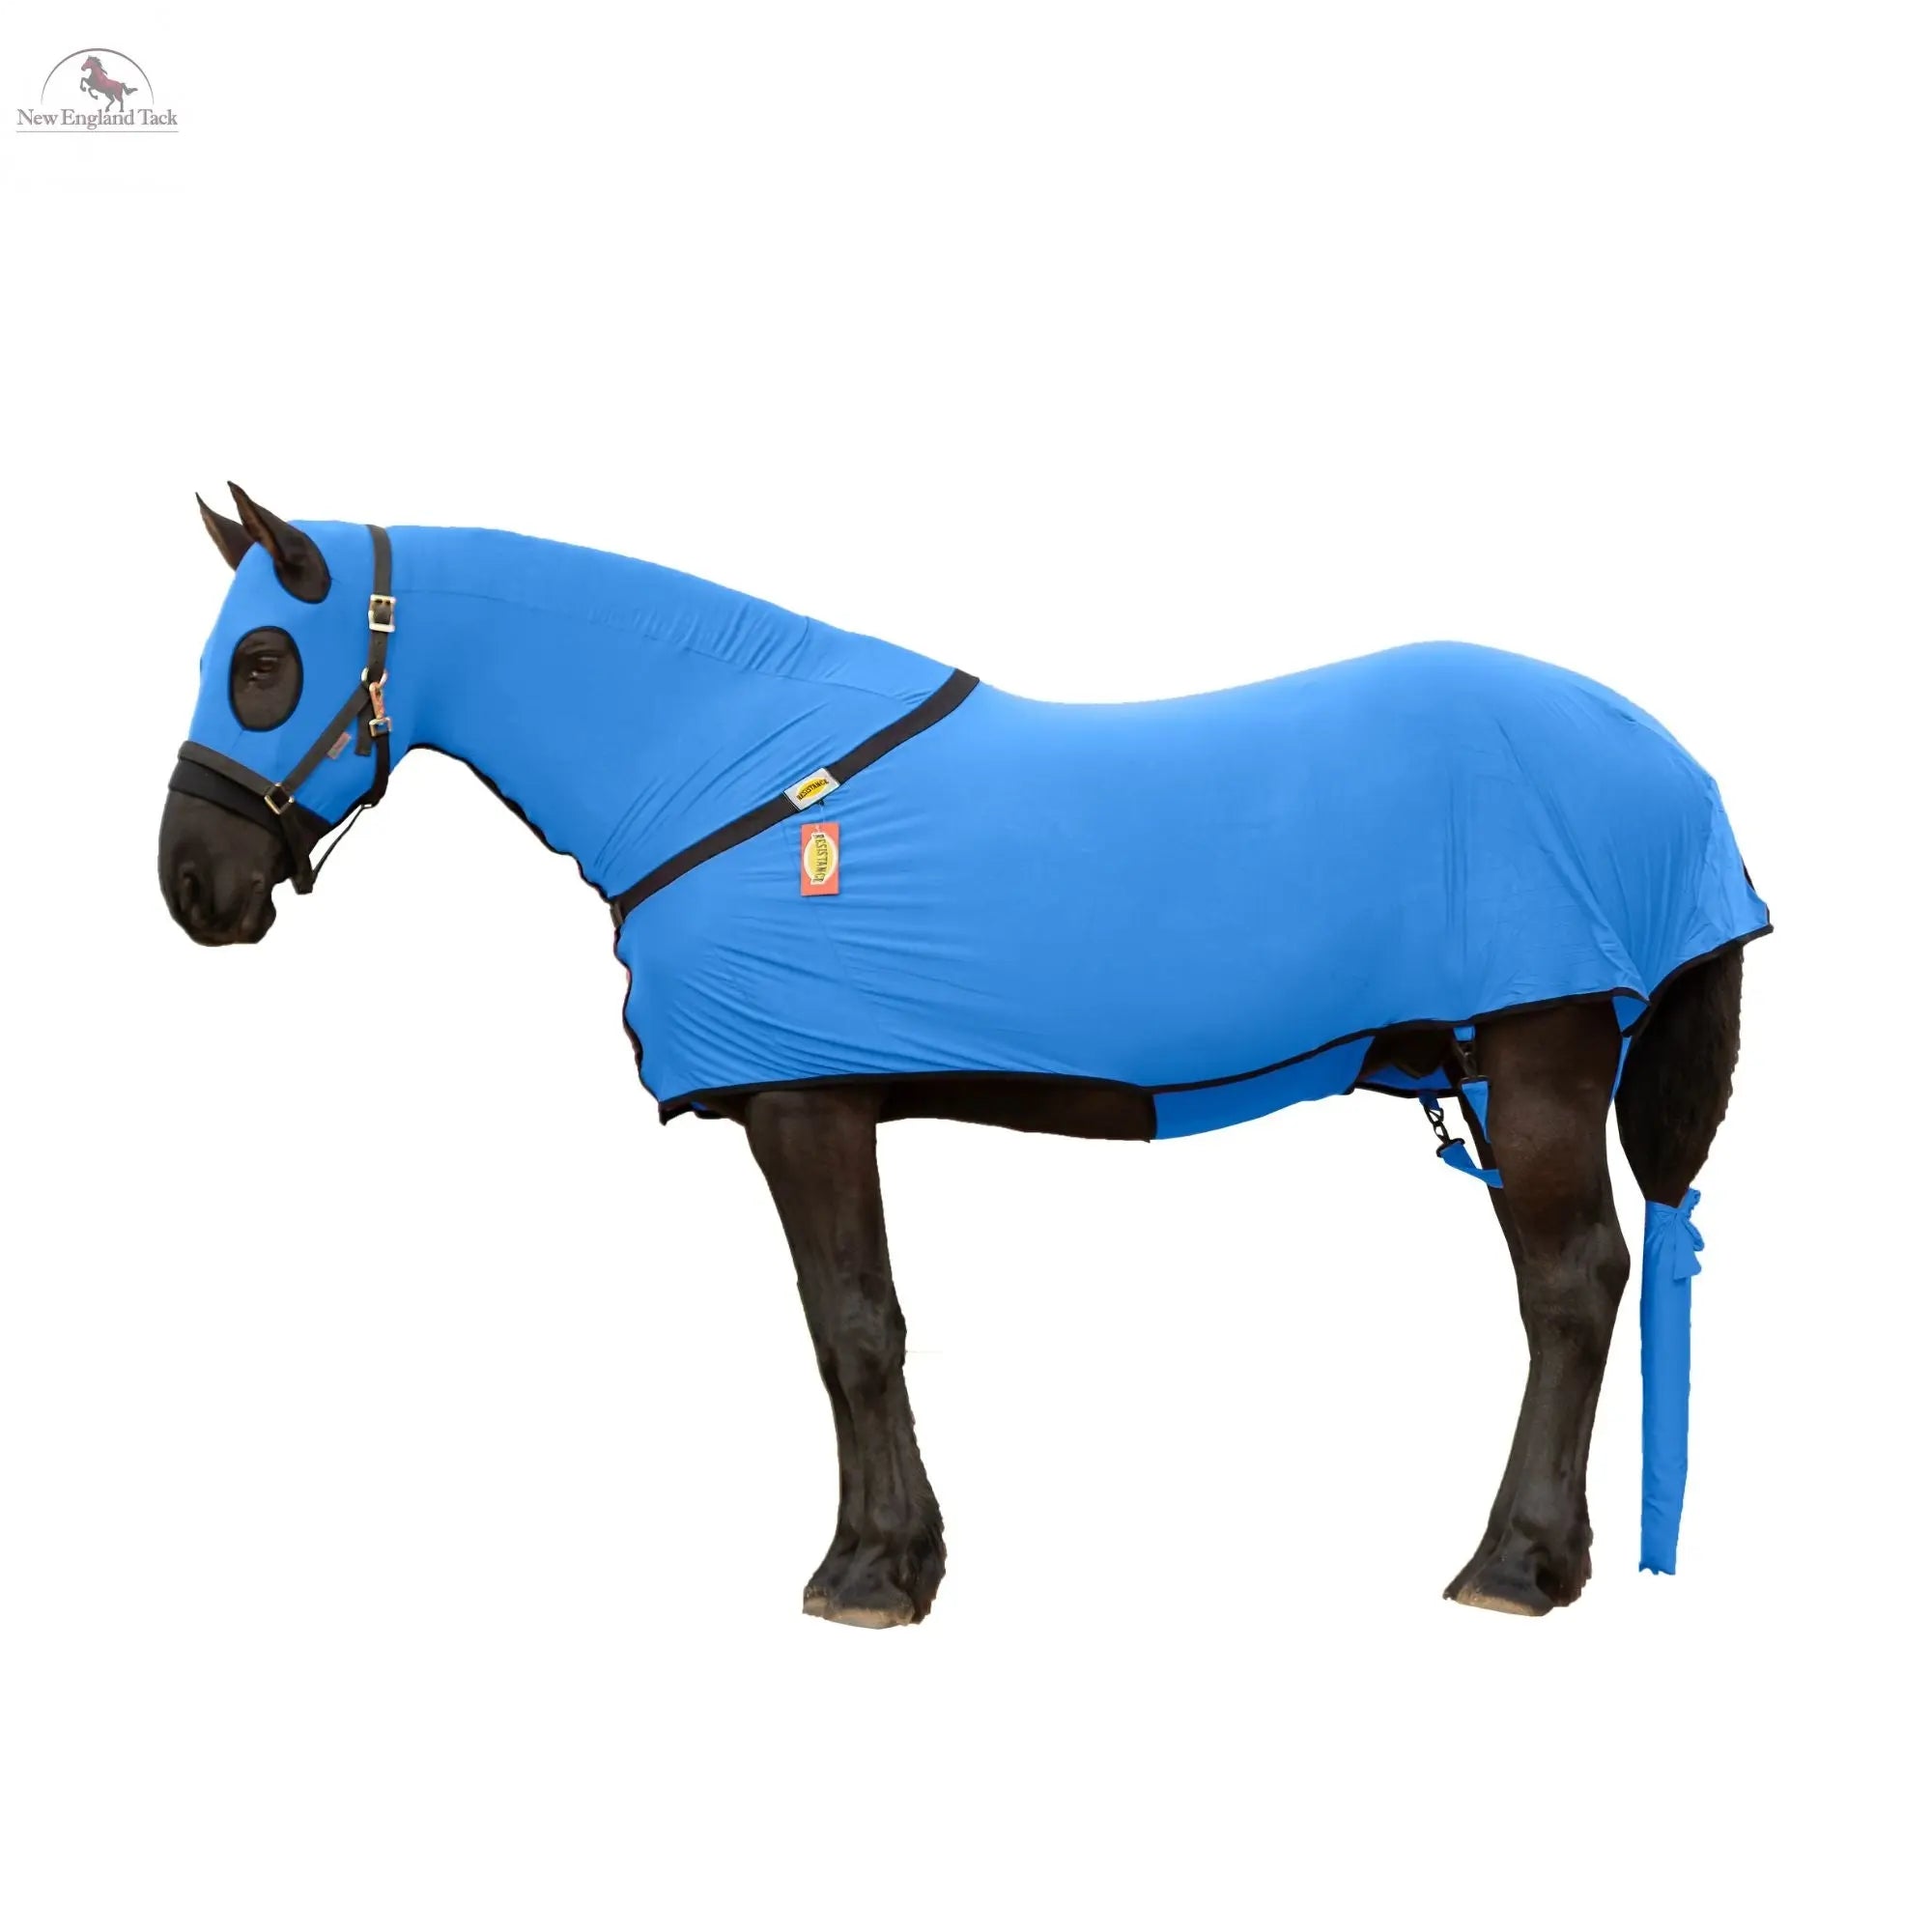 RESISTANCE Full Body Slinky with Full Zipper Slicker Hood and Belly Wrap NewEnglandTack